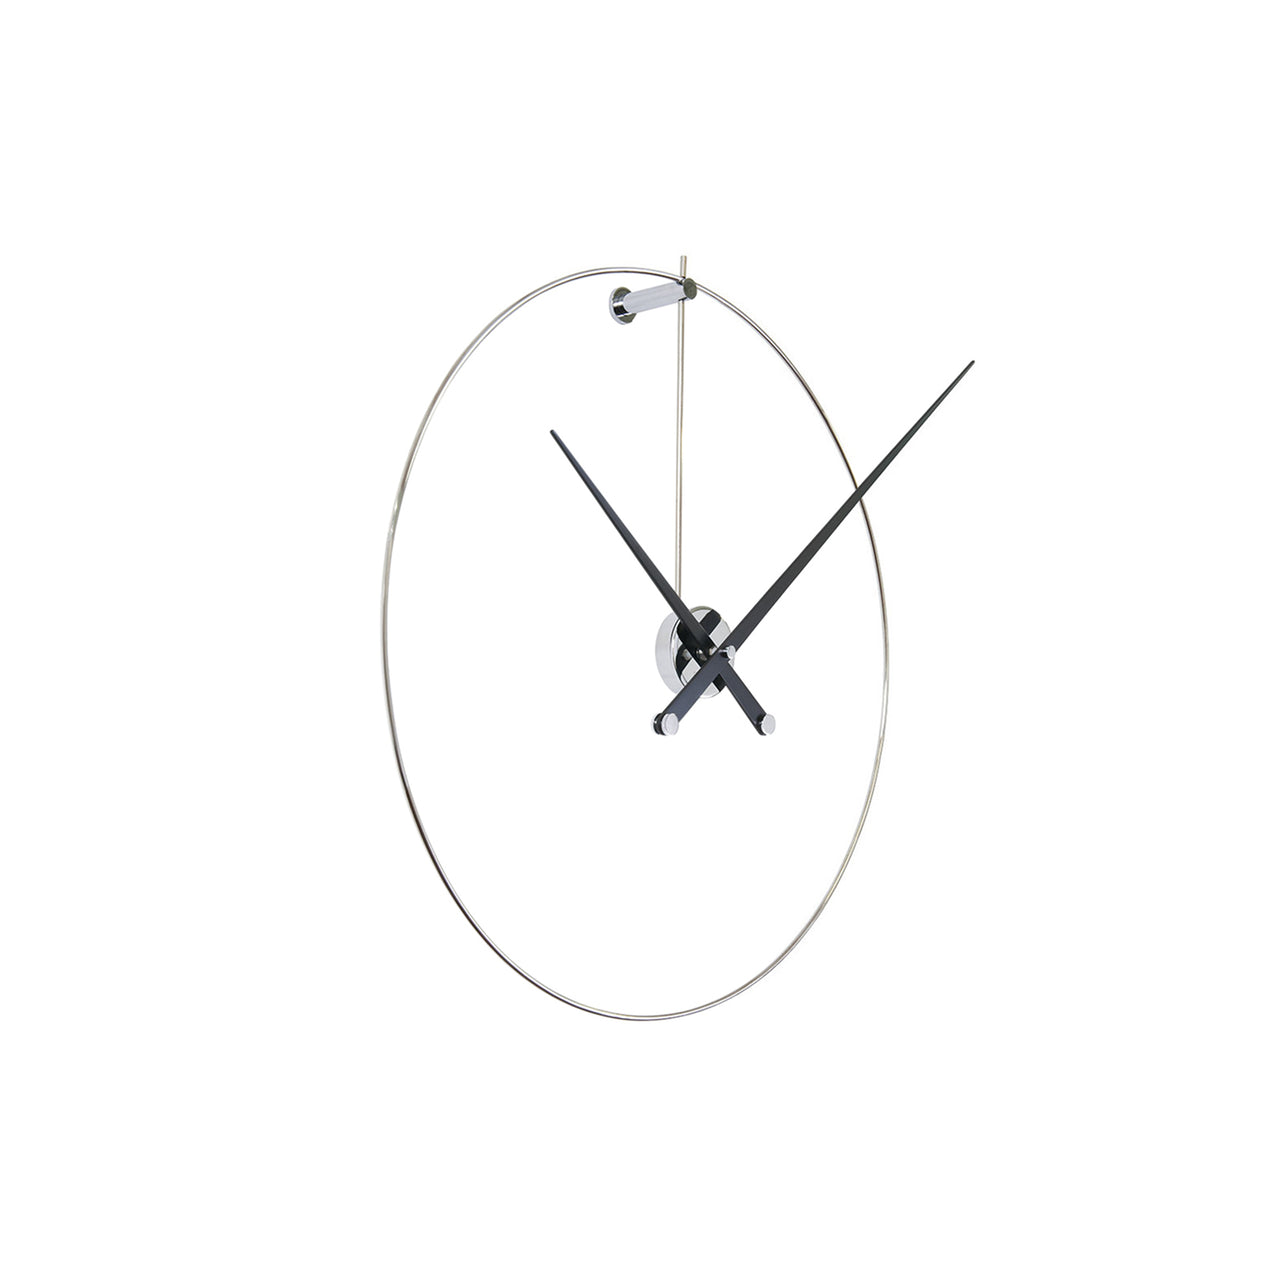 New Anda Clock: Stainless Steel + Black Lacquered Walnut